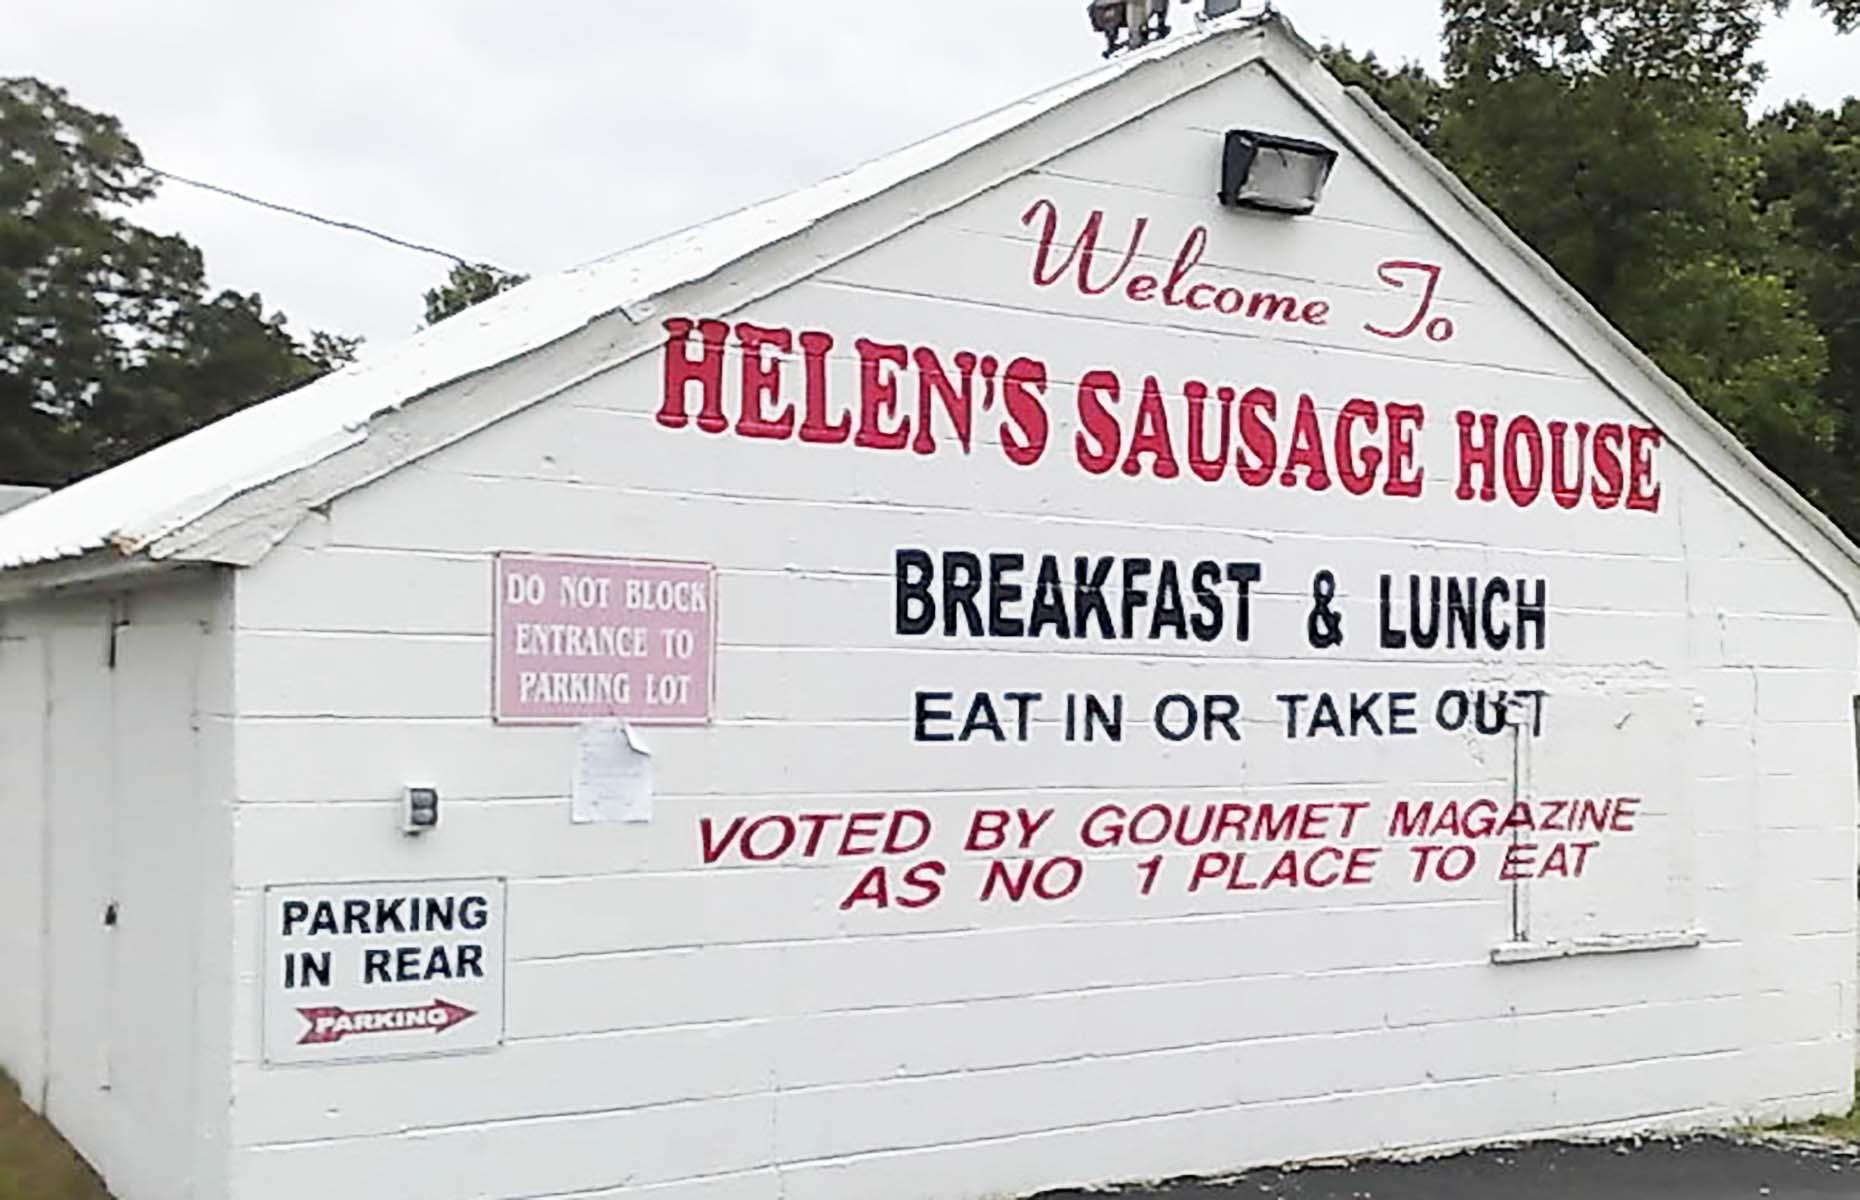 <p>Located on Dupont Highway heading towards Smyrna, Helen’s Sausage House may not look like much from the outside. However, the modest diner is an Elvis Presley shrine on the inside and attracts hordes from near and far, hoping to try its signature sausage sandwich. It features two juicy, well-seasoned sausages and scrambled eggs in a soft roll and customers <a href="https://www.yelp.com/biz/helens-sausage-house-smyrna?sort_by=date_desc">absolutely rave</a> about it.</p>